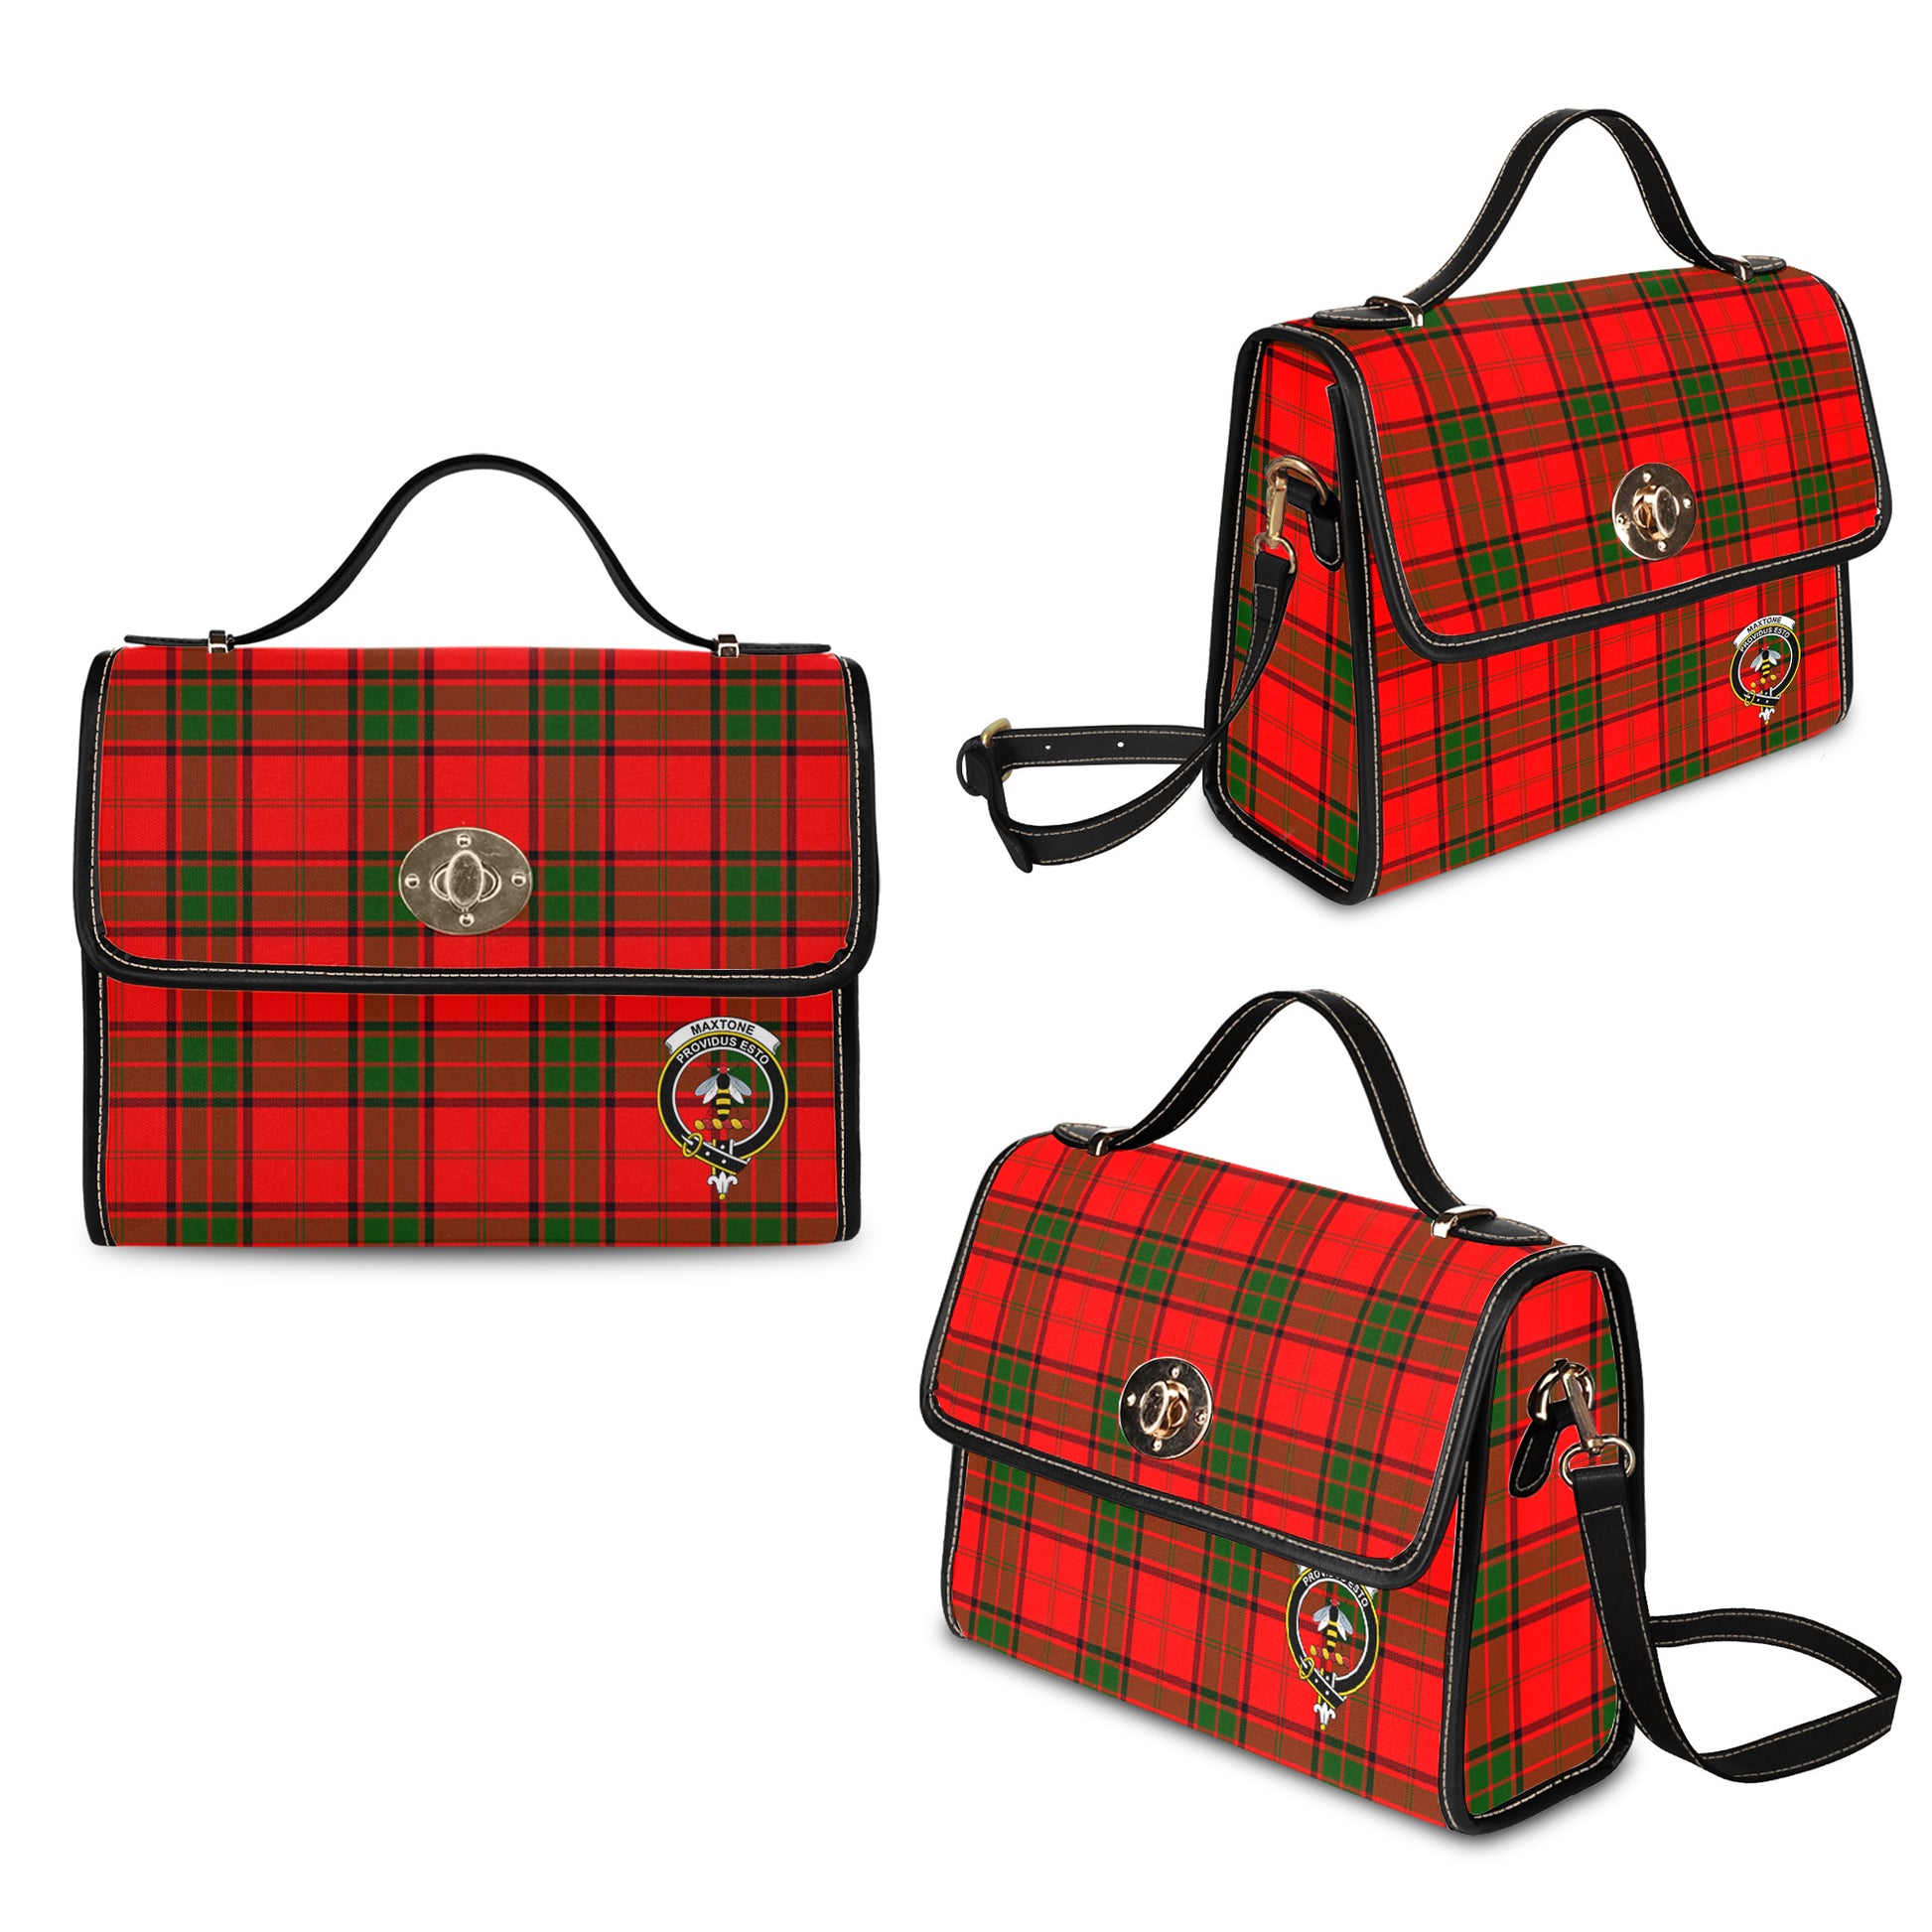 maxtone-tartan-leather-strap-waterproof-canvas-bag-with-family-crest